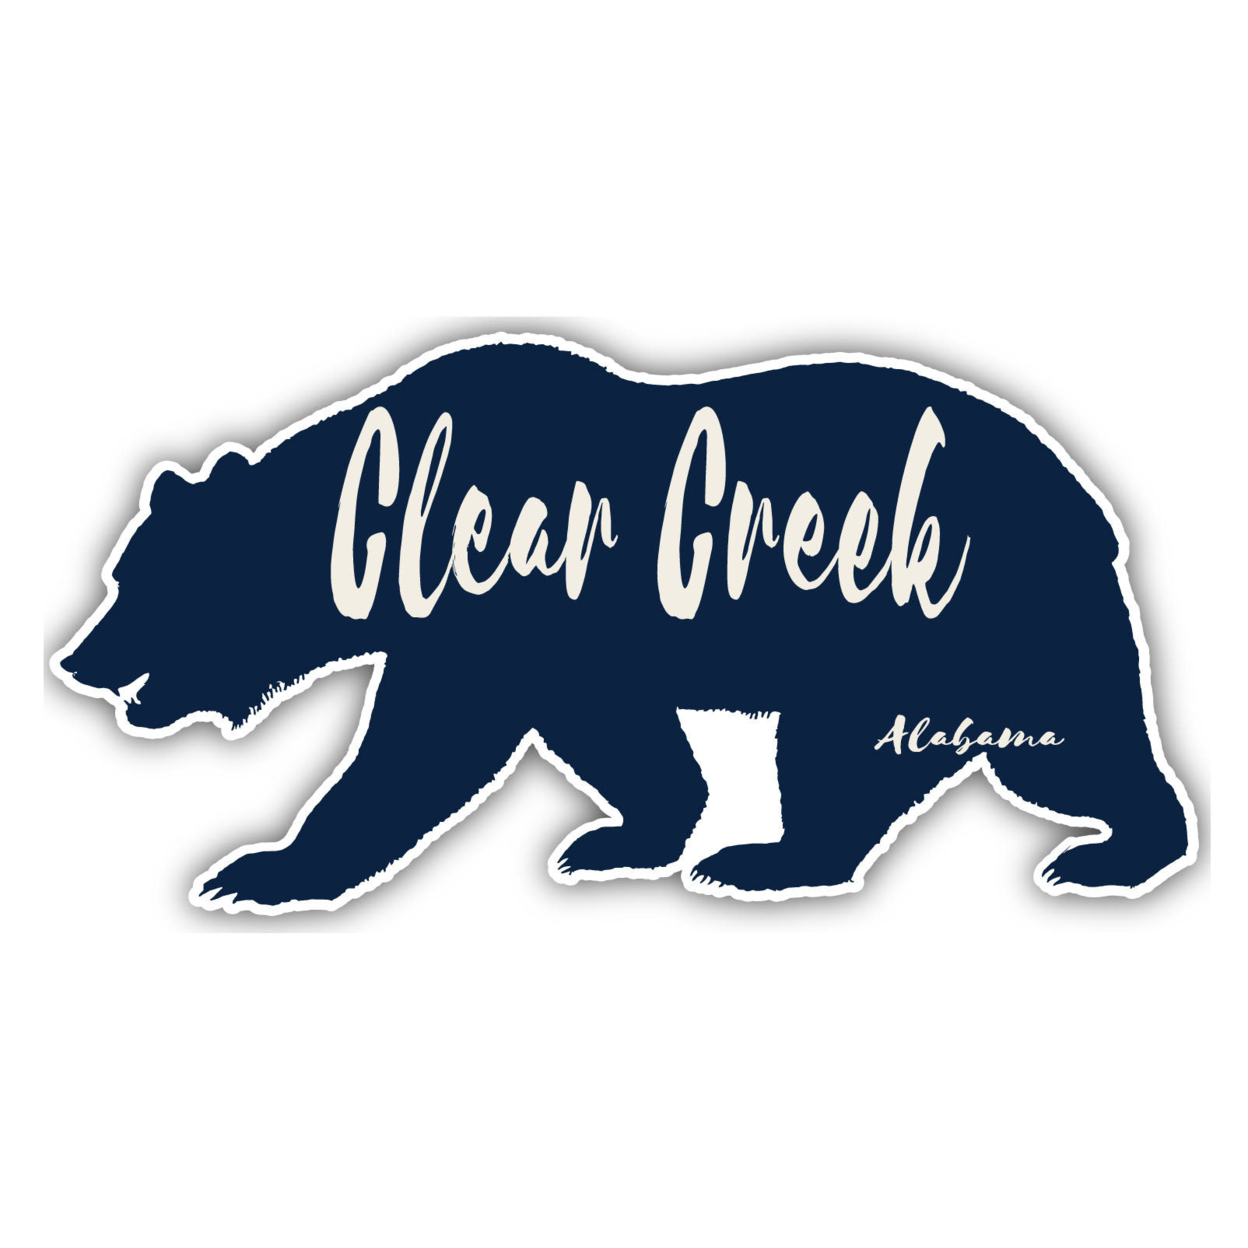 Clear Creek Alabama Souvenir Decorative Stickers (Choose Theme And Size) - 4-Pack, 6-Inch, Adventures Awaits